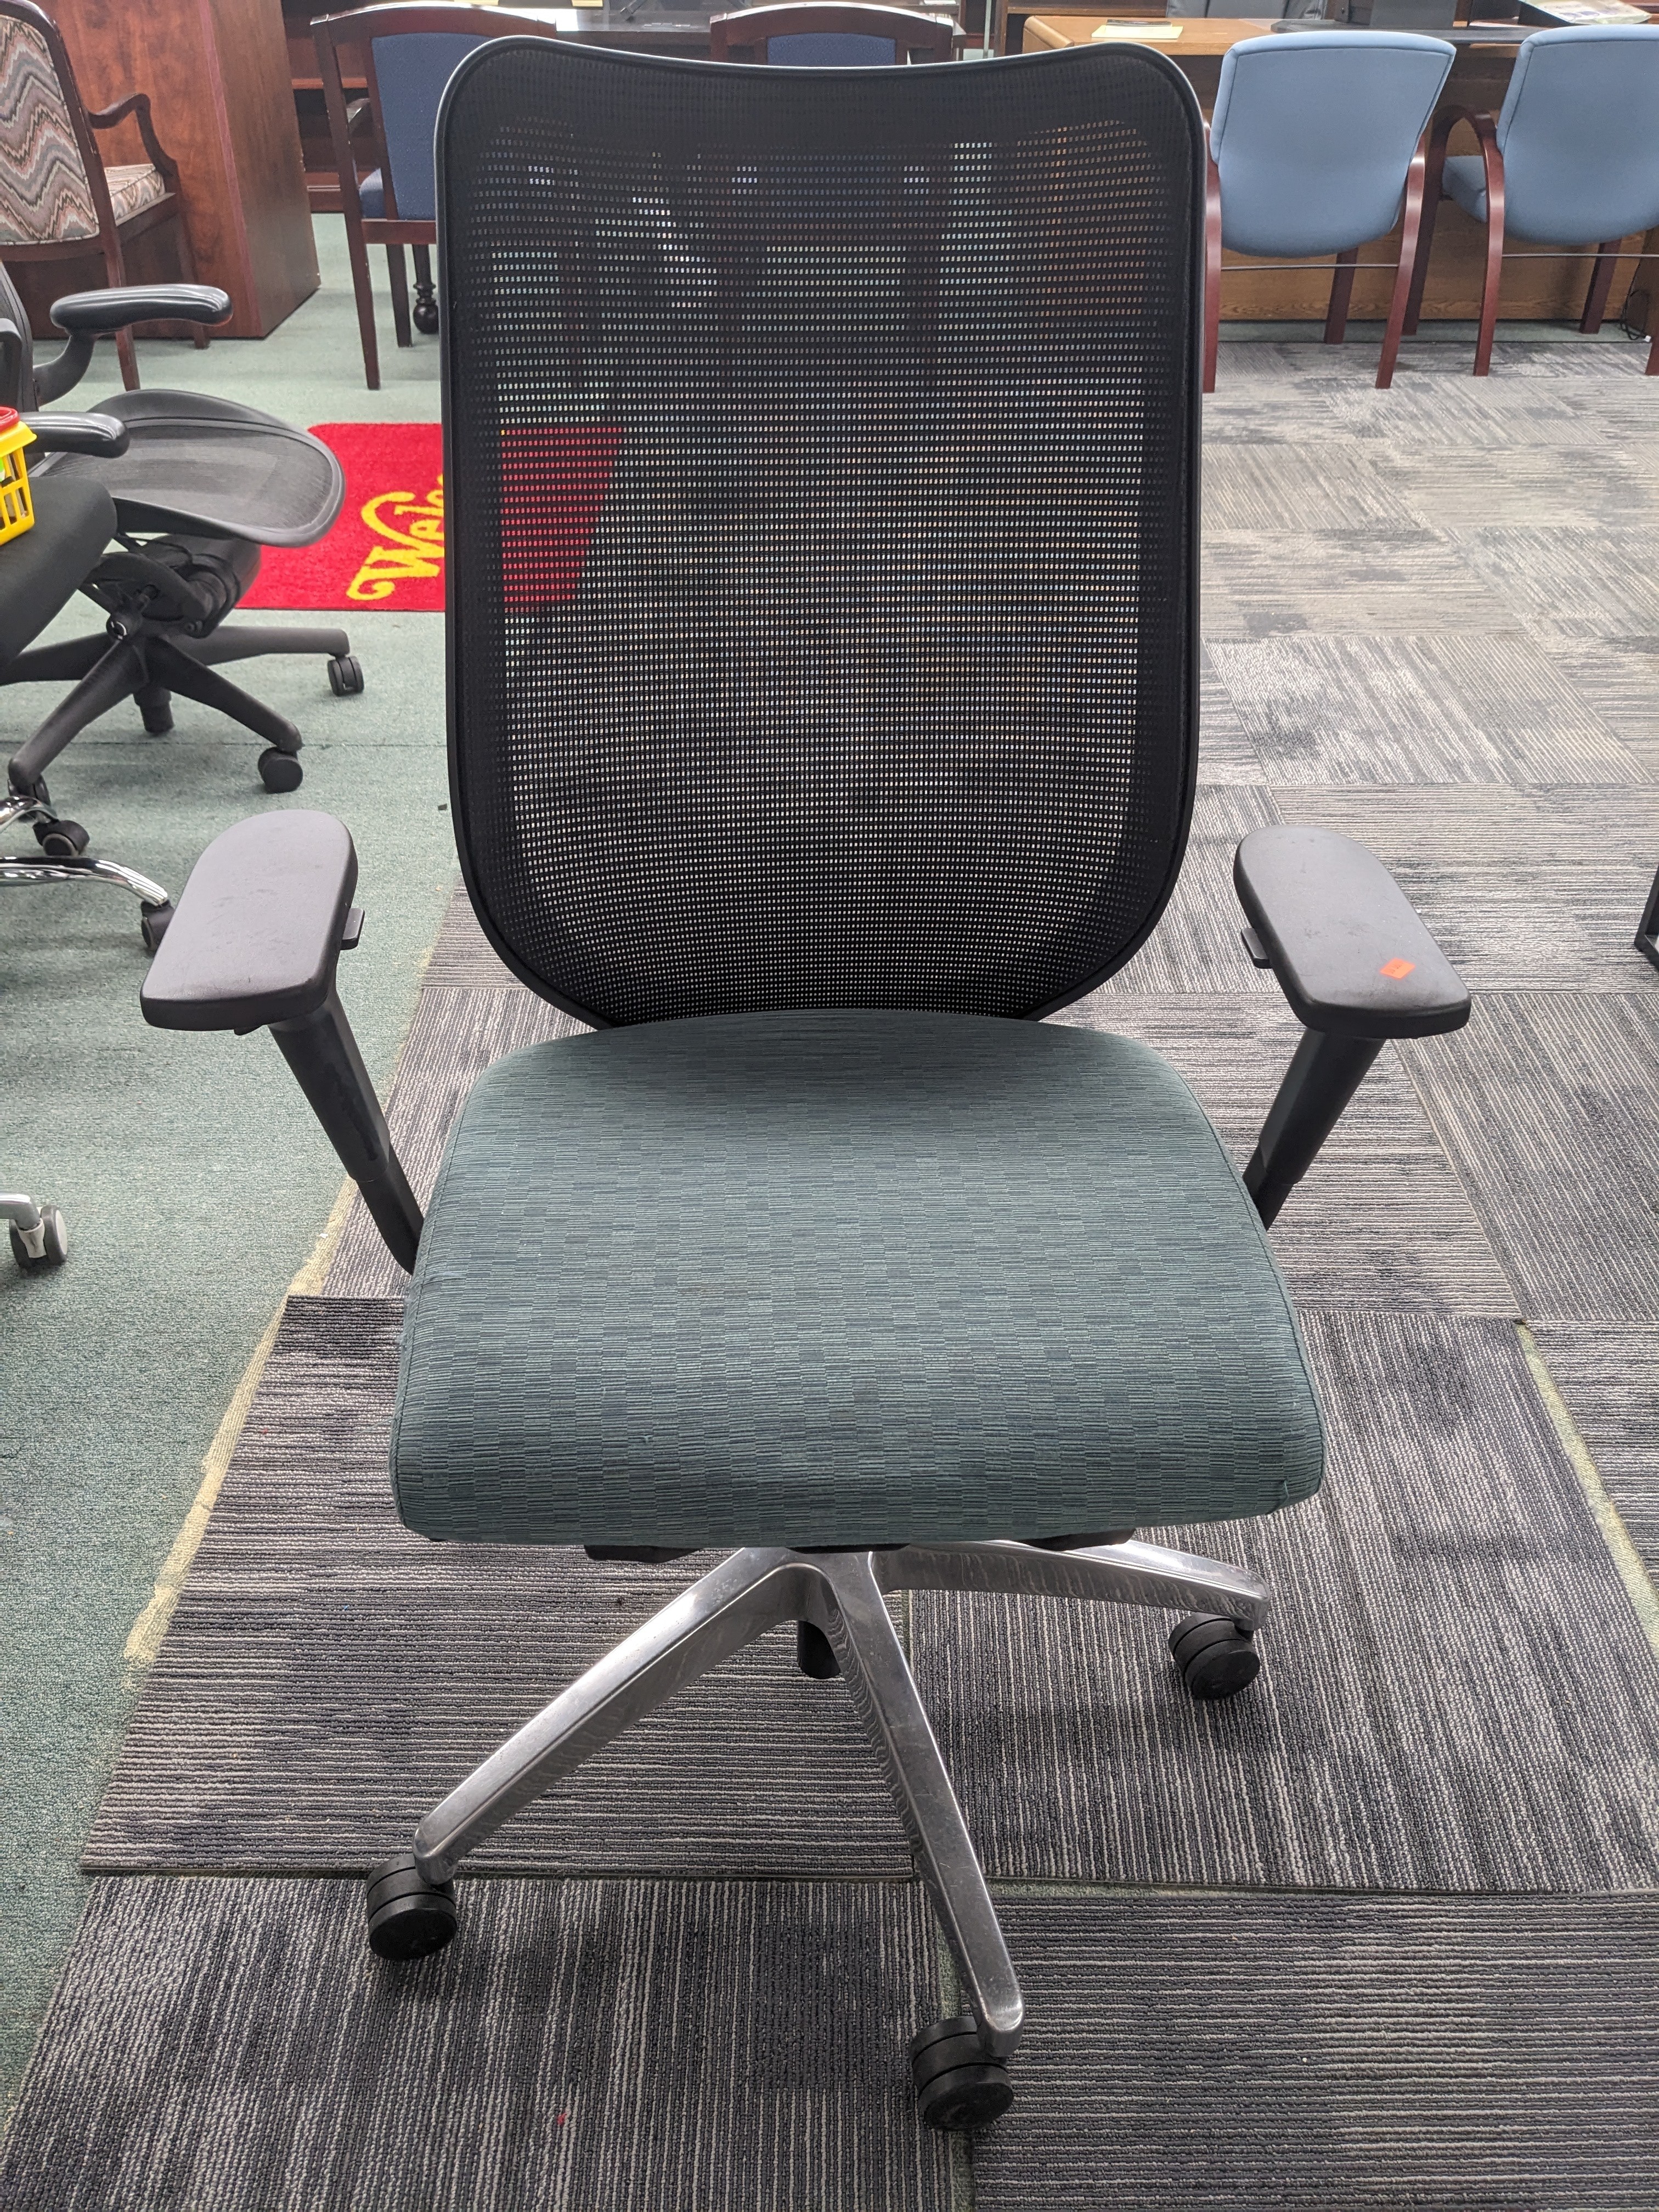 Used HON Nucleus Task Chair